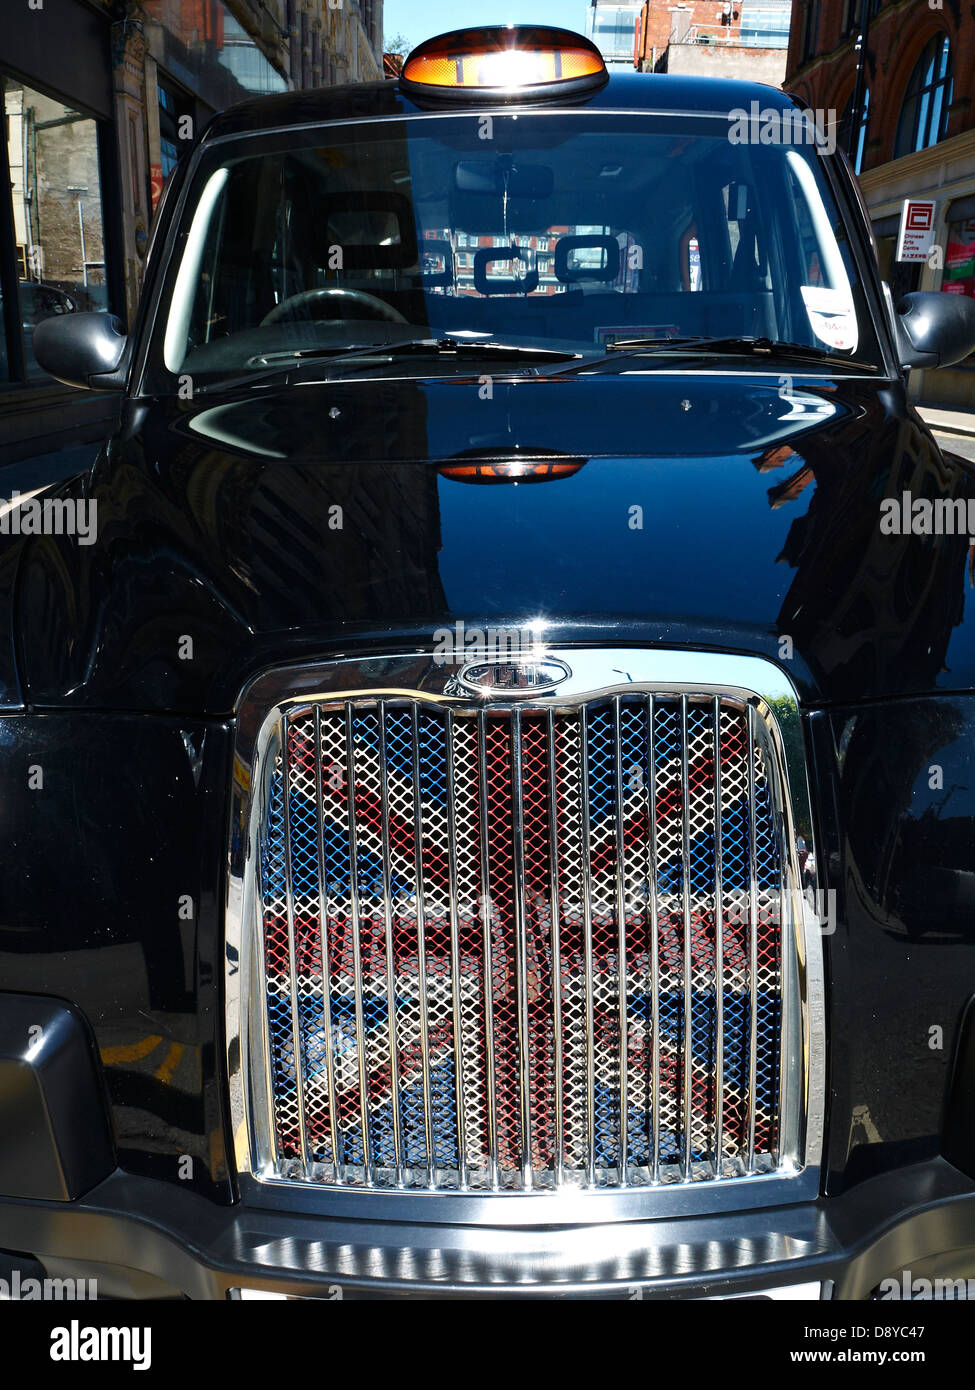 Taxi with union jack painted on grill UK Stock Photo - Alamy